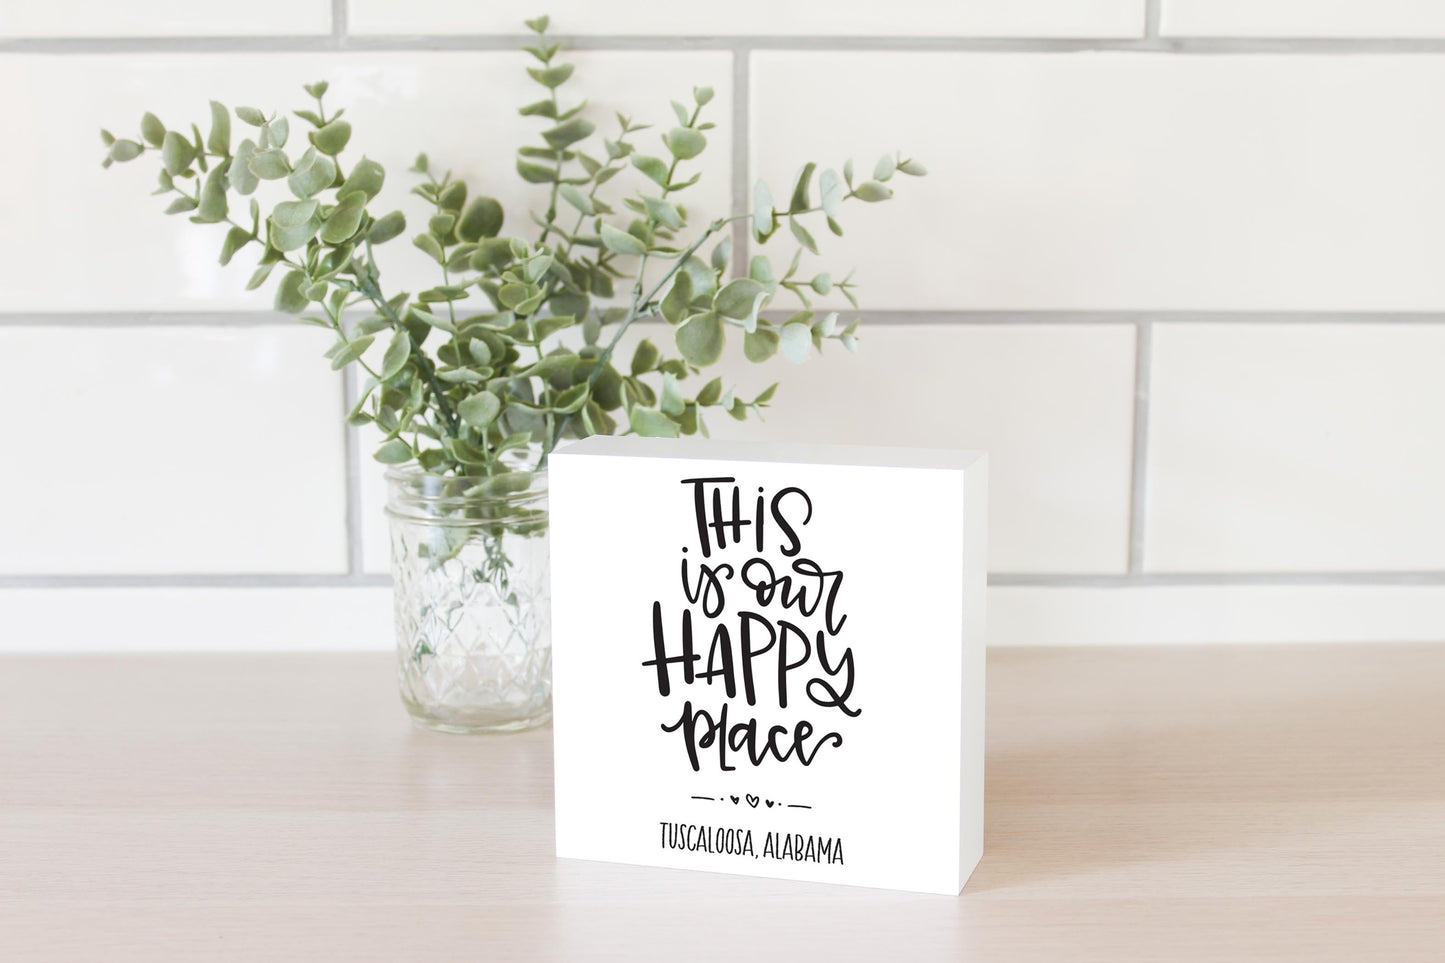 Clairmont & Co Local This Is Our Happy Place | 5x5